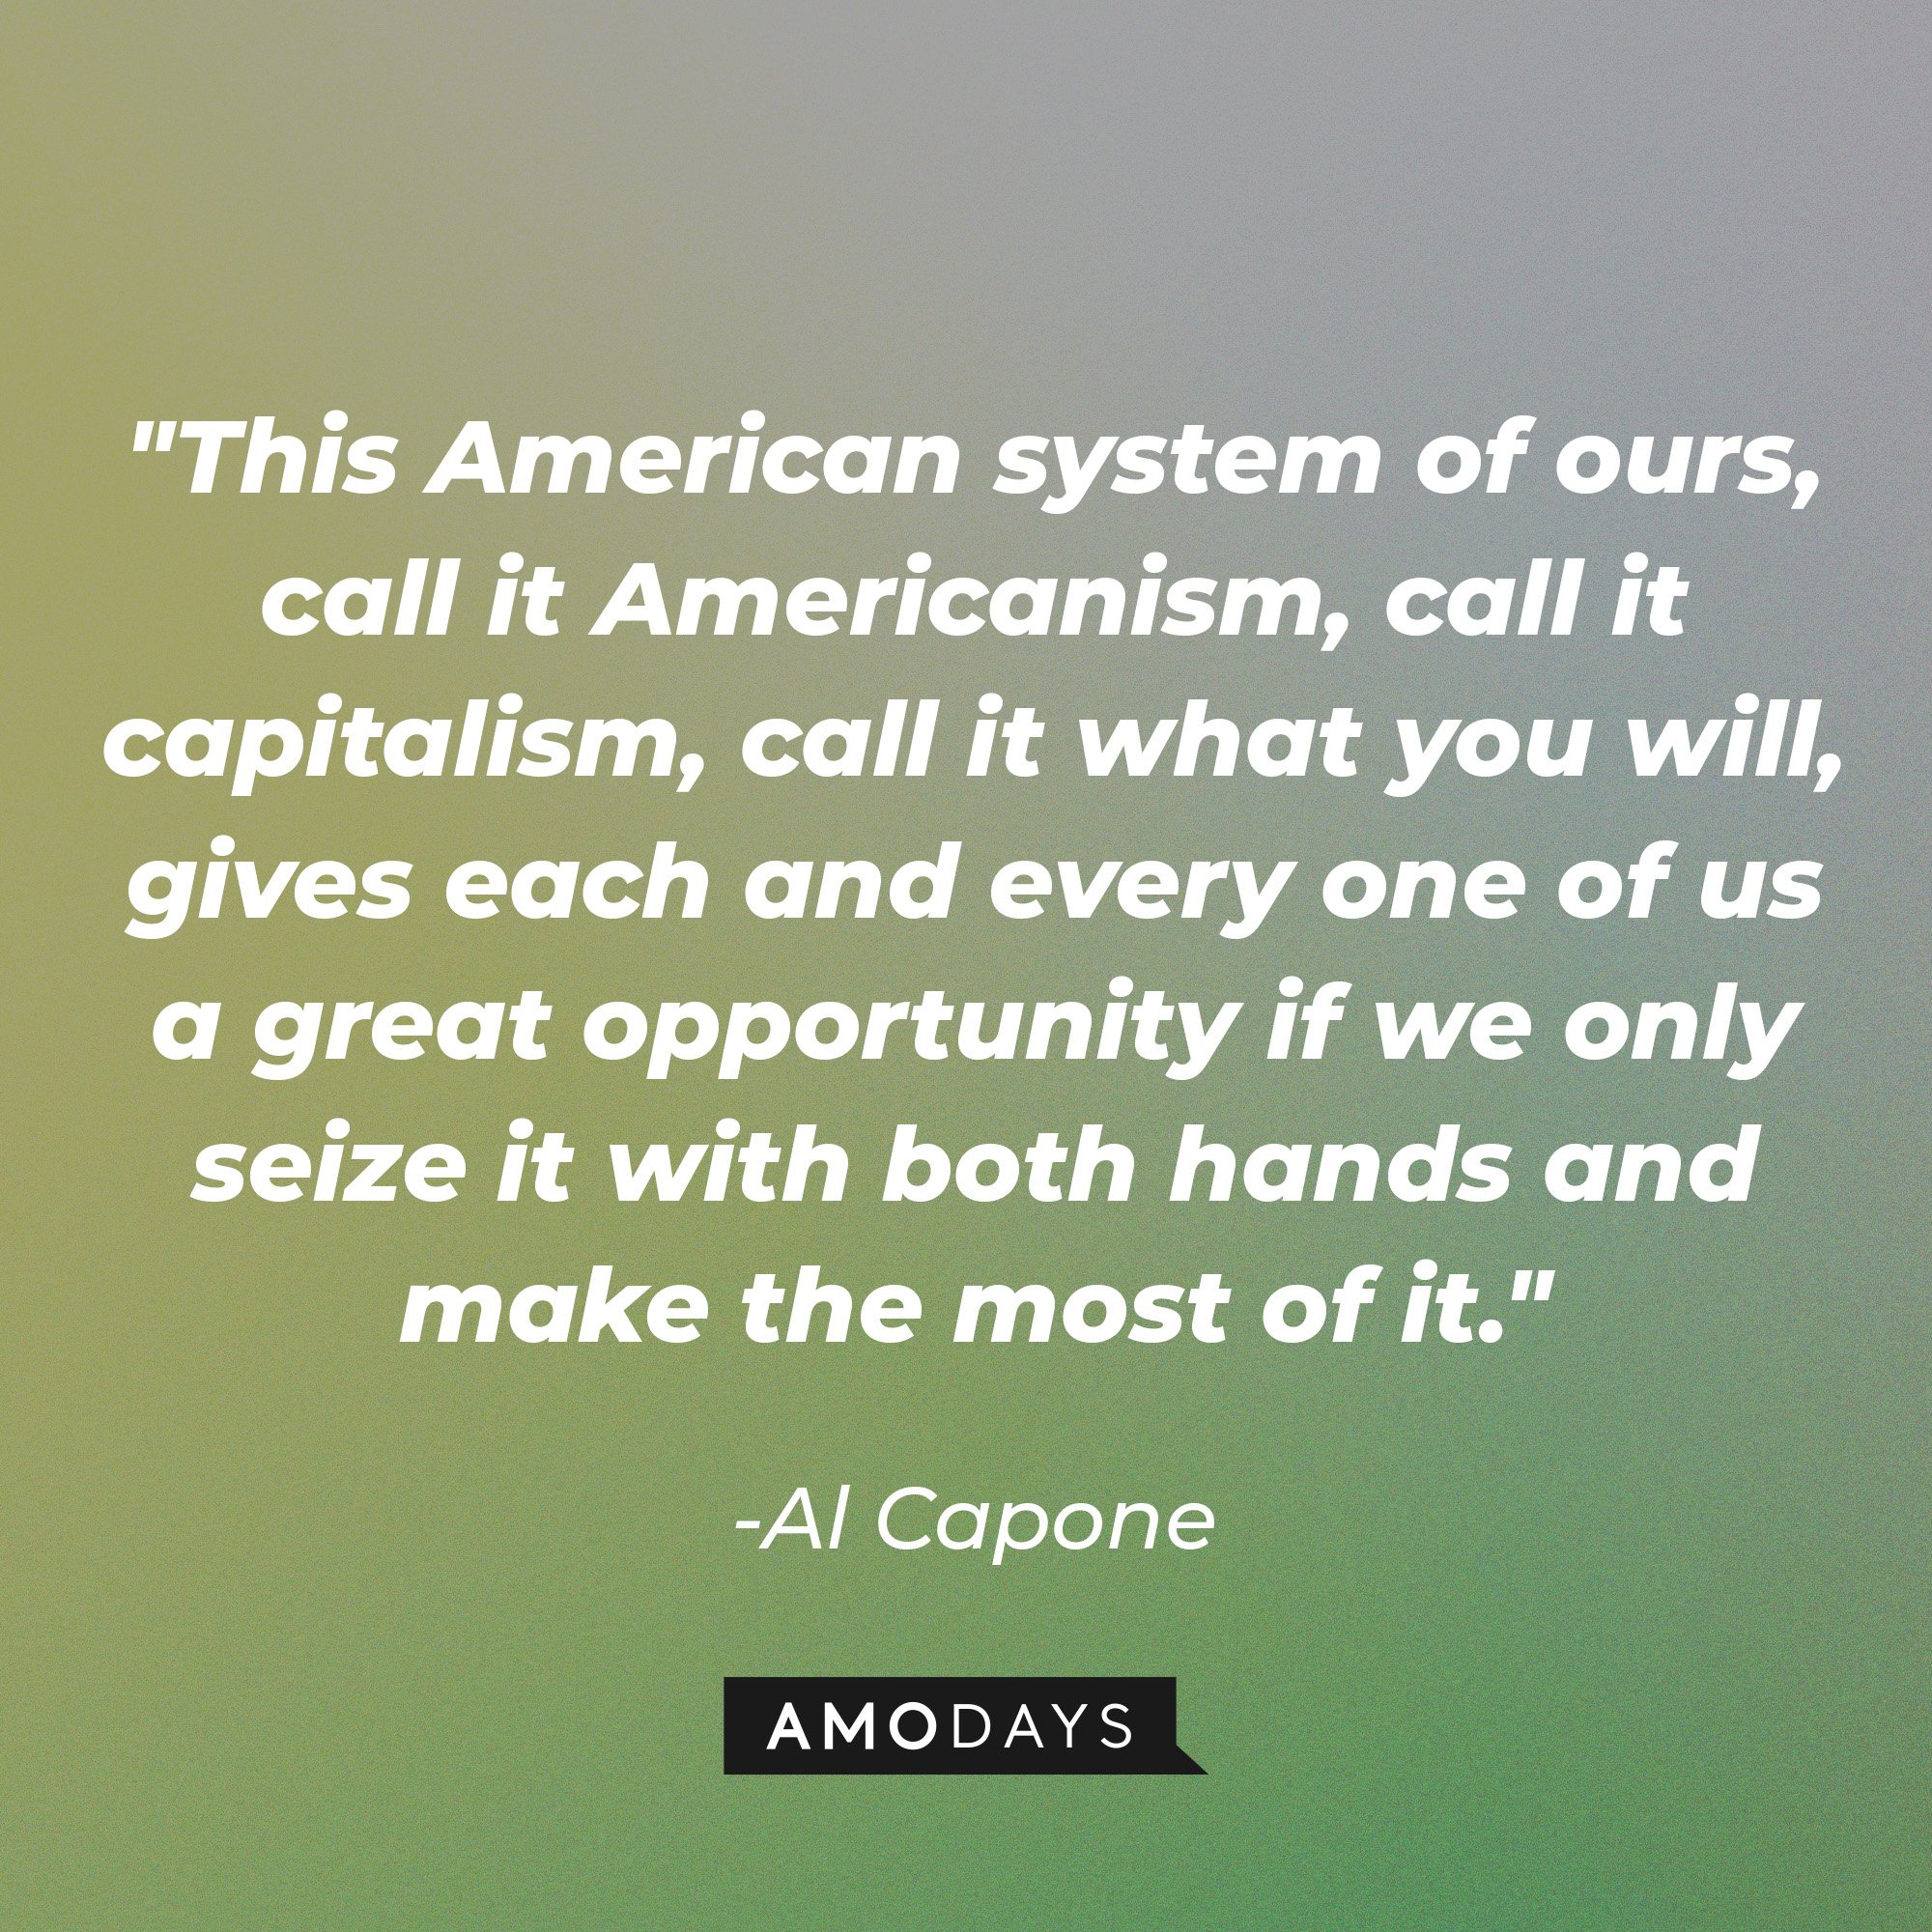 Al Capone's quote: "This American system of ours, call it Americanism, call it capitalism, call it what you will, gives each and every one of us a great opportunity if we only seize it with both hands and make the most of it." | Image: AmoDays